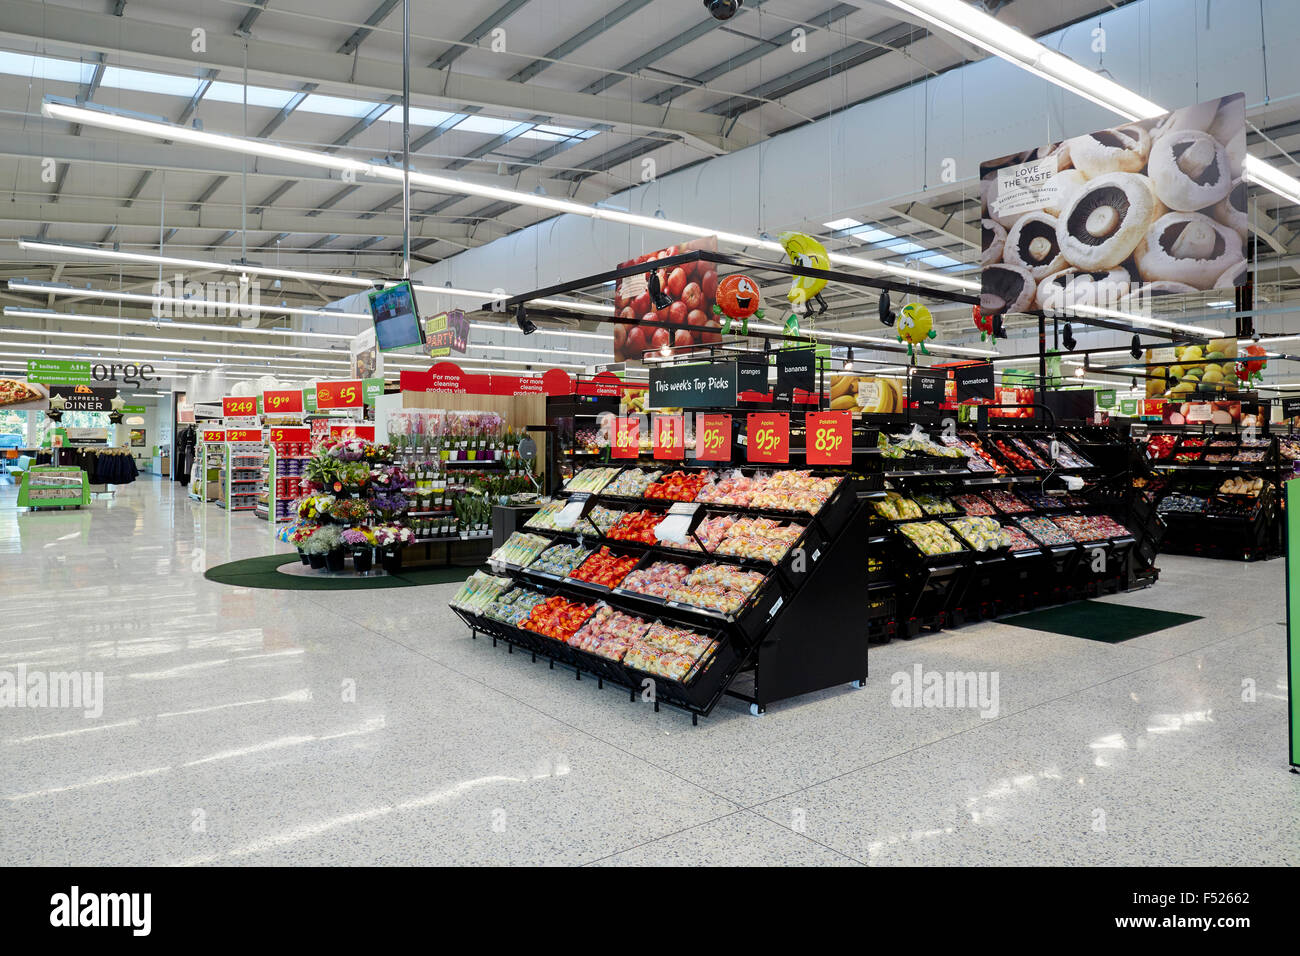 Asda Open their new store in Altrincham, Cheshire, UK on George Richards Way.  Pictured interior of the new store rows fruit veg Stock Photo